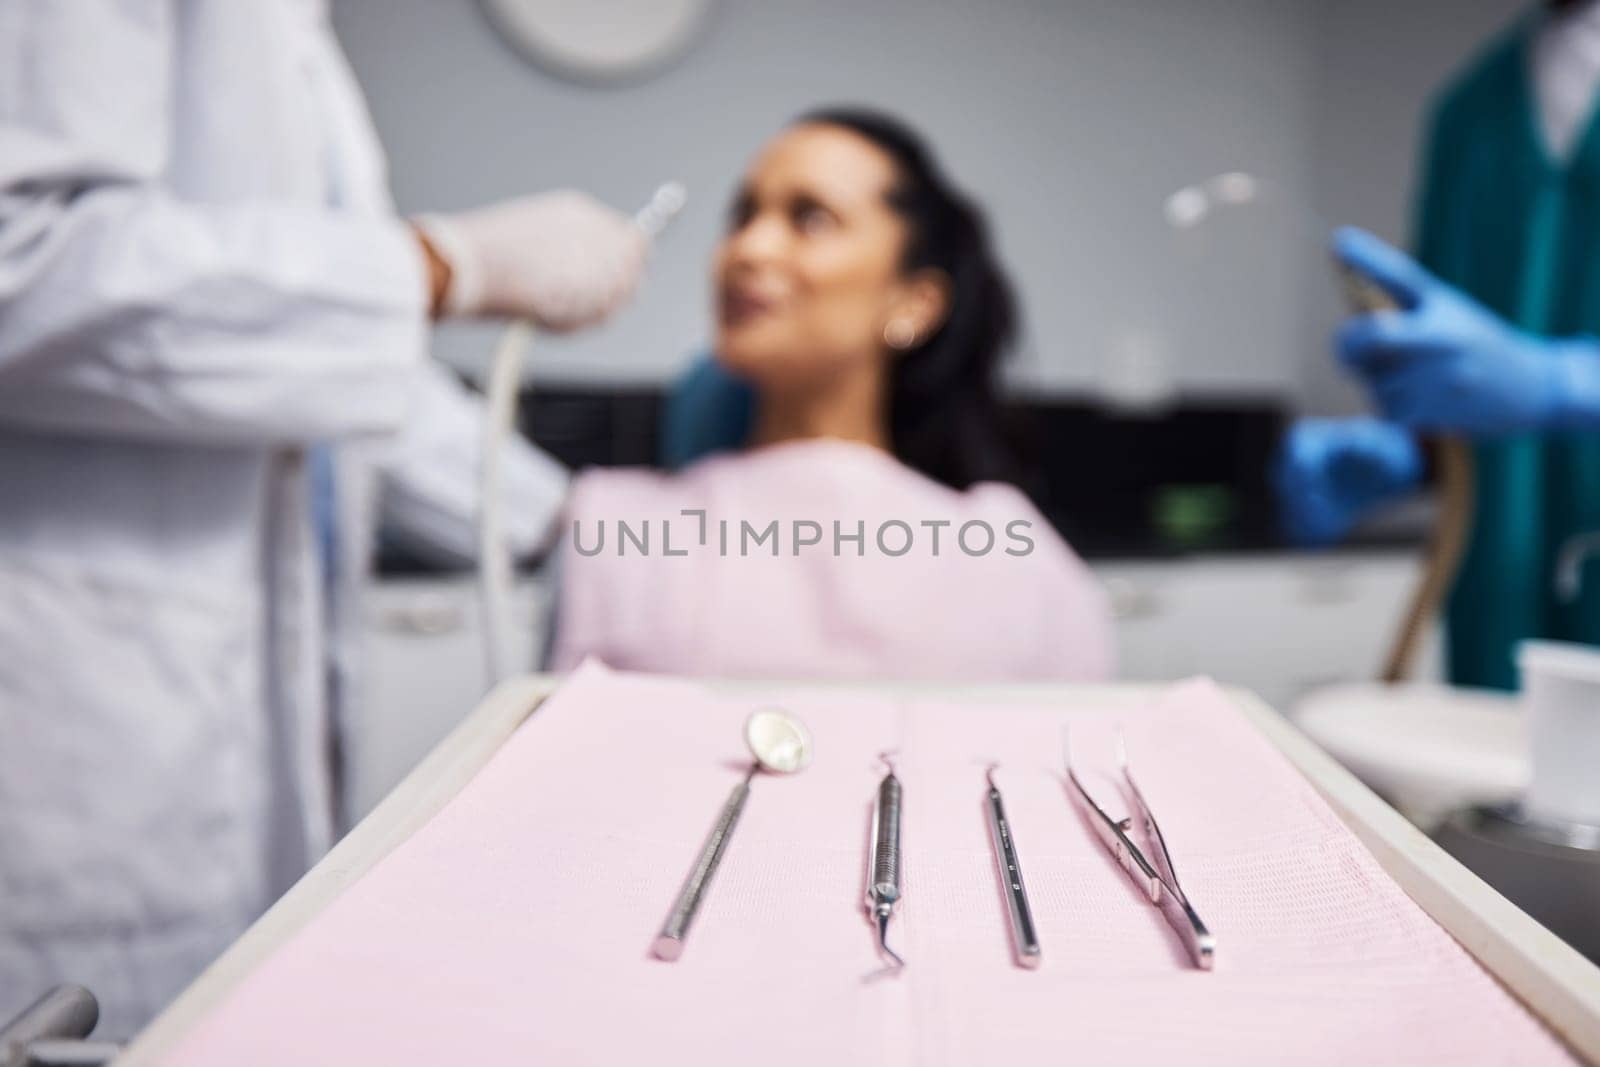 Reporting for dental hygiene duty. a woman having dental work done on her teeth with various tools in the foreground. by YuriArcurs